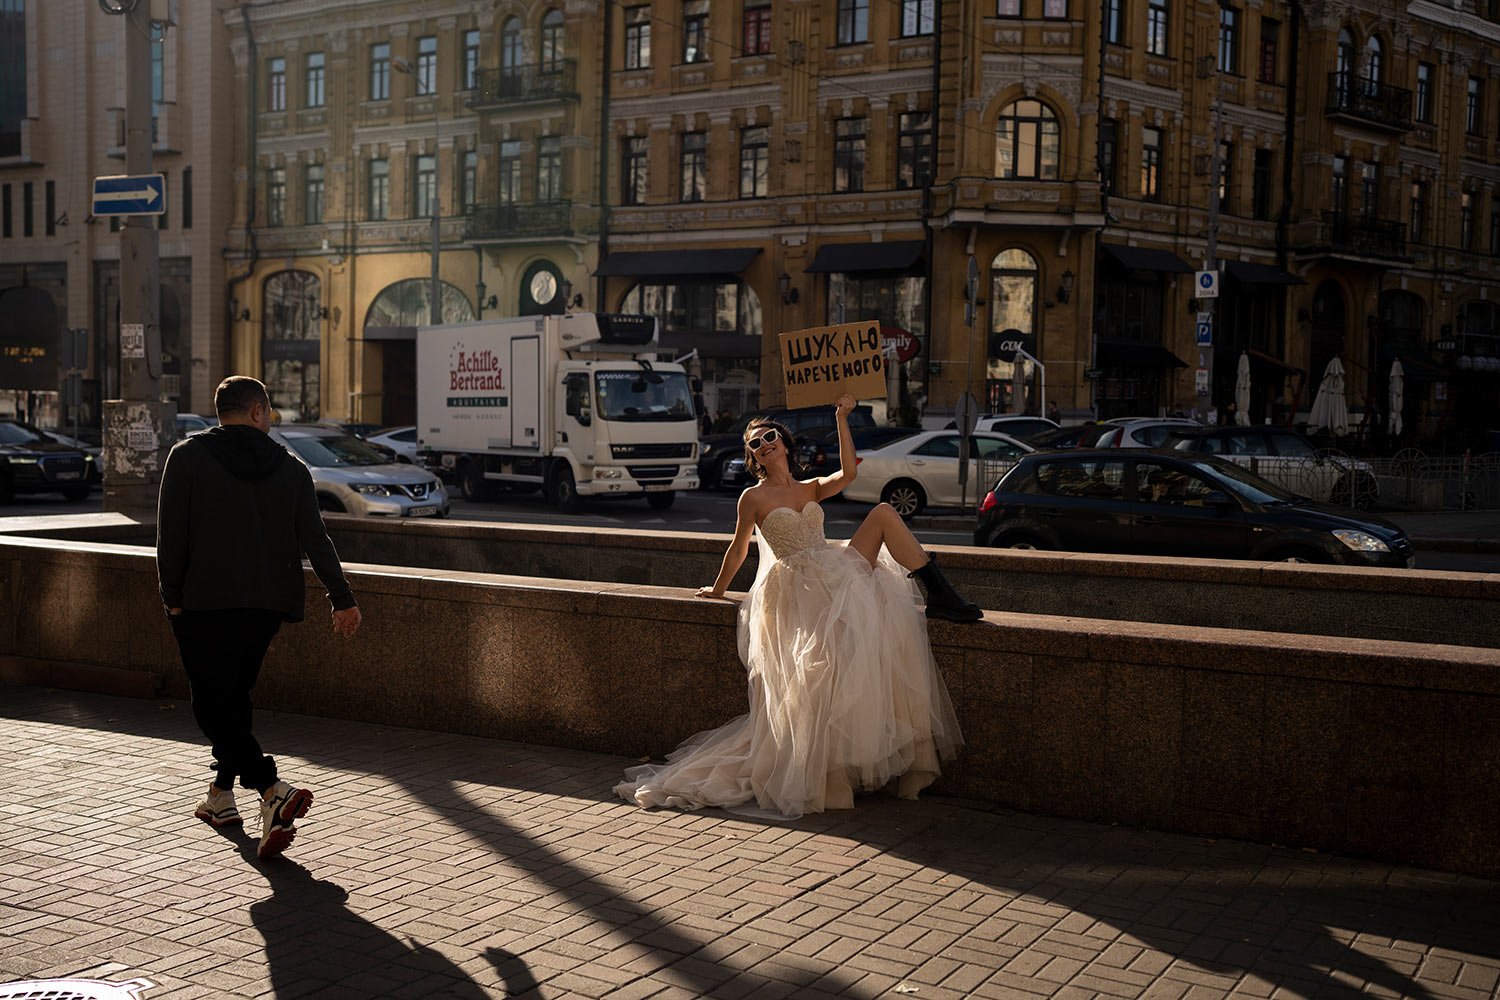  A woman poses for a social media campaign in Kyiv, Ukraine, Tuesday, Oct. 31, 2023. The sign reads, “Looking for a groom.” (AP Photo/Bram Janssen) 